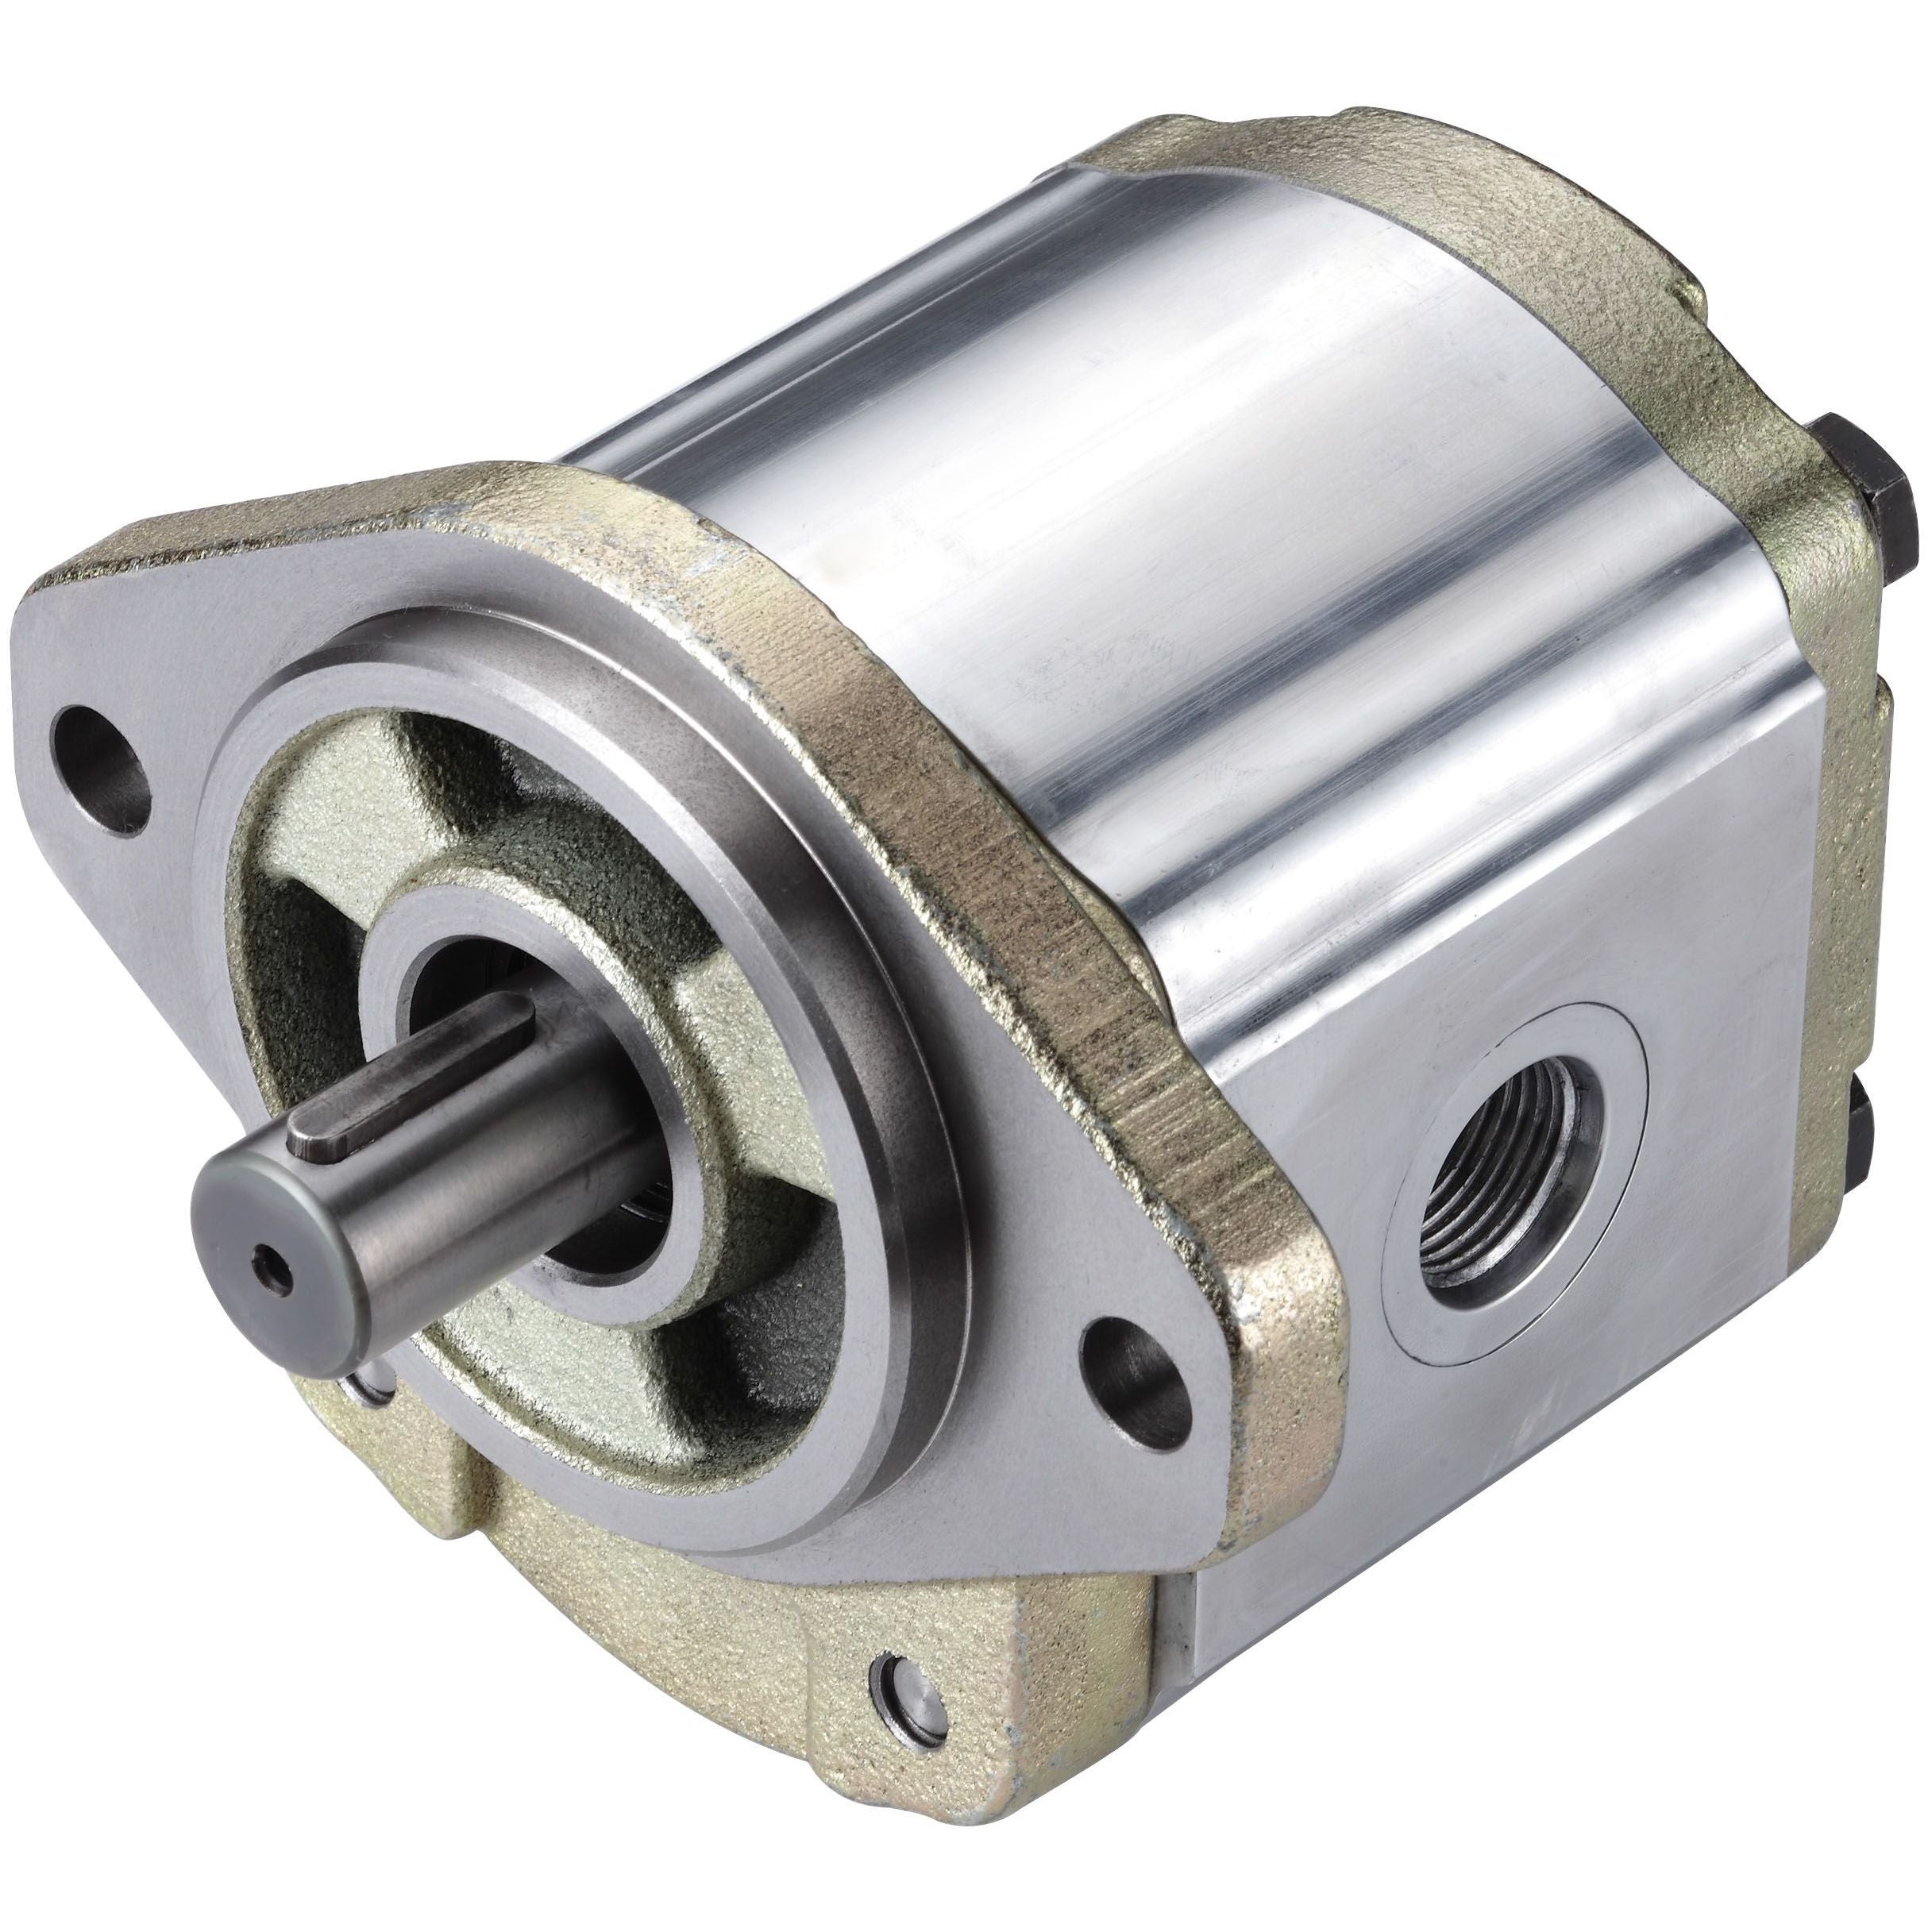 3GB8U170L : Honor Gear Pump, CCW Rotation, 70cc (4.27in3), 33.29 GPM, 2300psi, 2500 RPM, #16 SAE (1") In, #16 SAE (1") Out, Splined Shaft 13-Tooth, 16/32 Pitch, SAE B 2-Bolt Mount